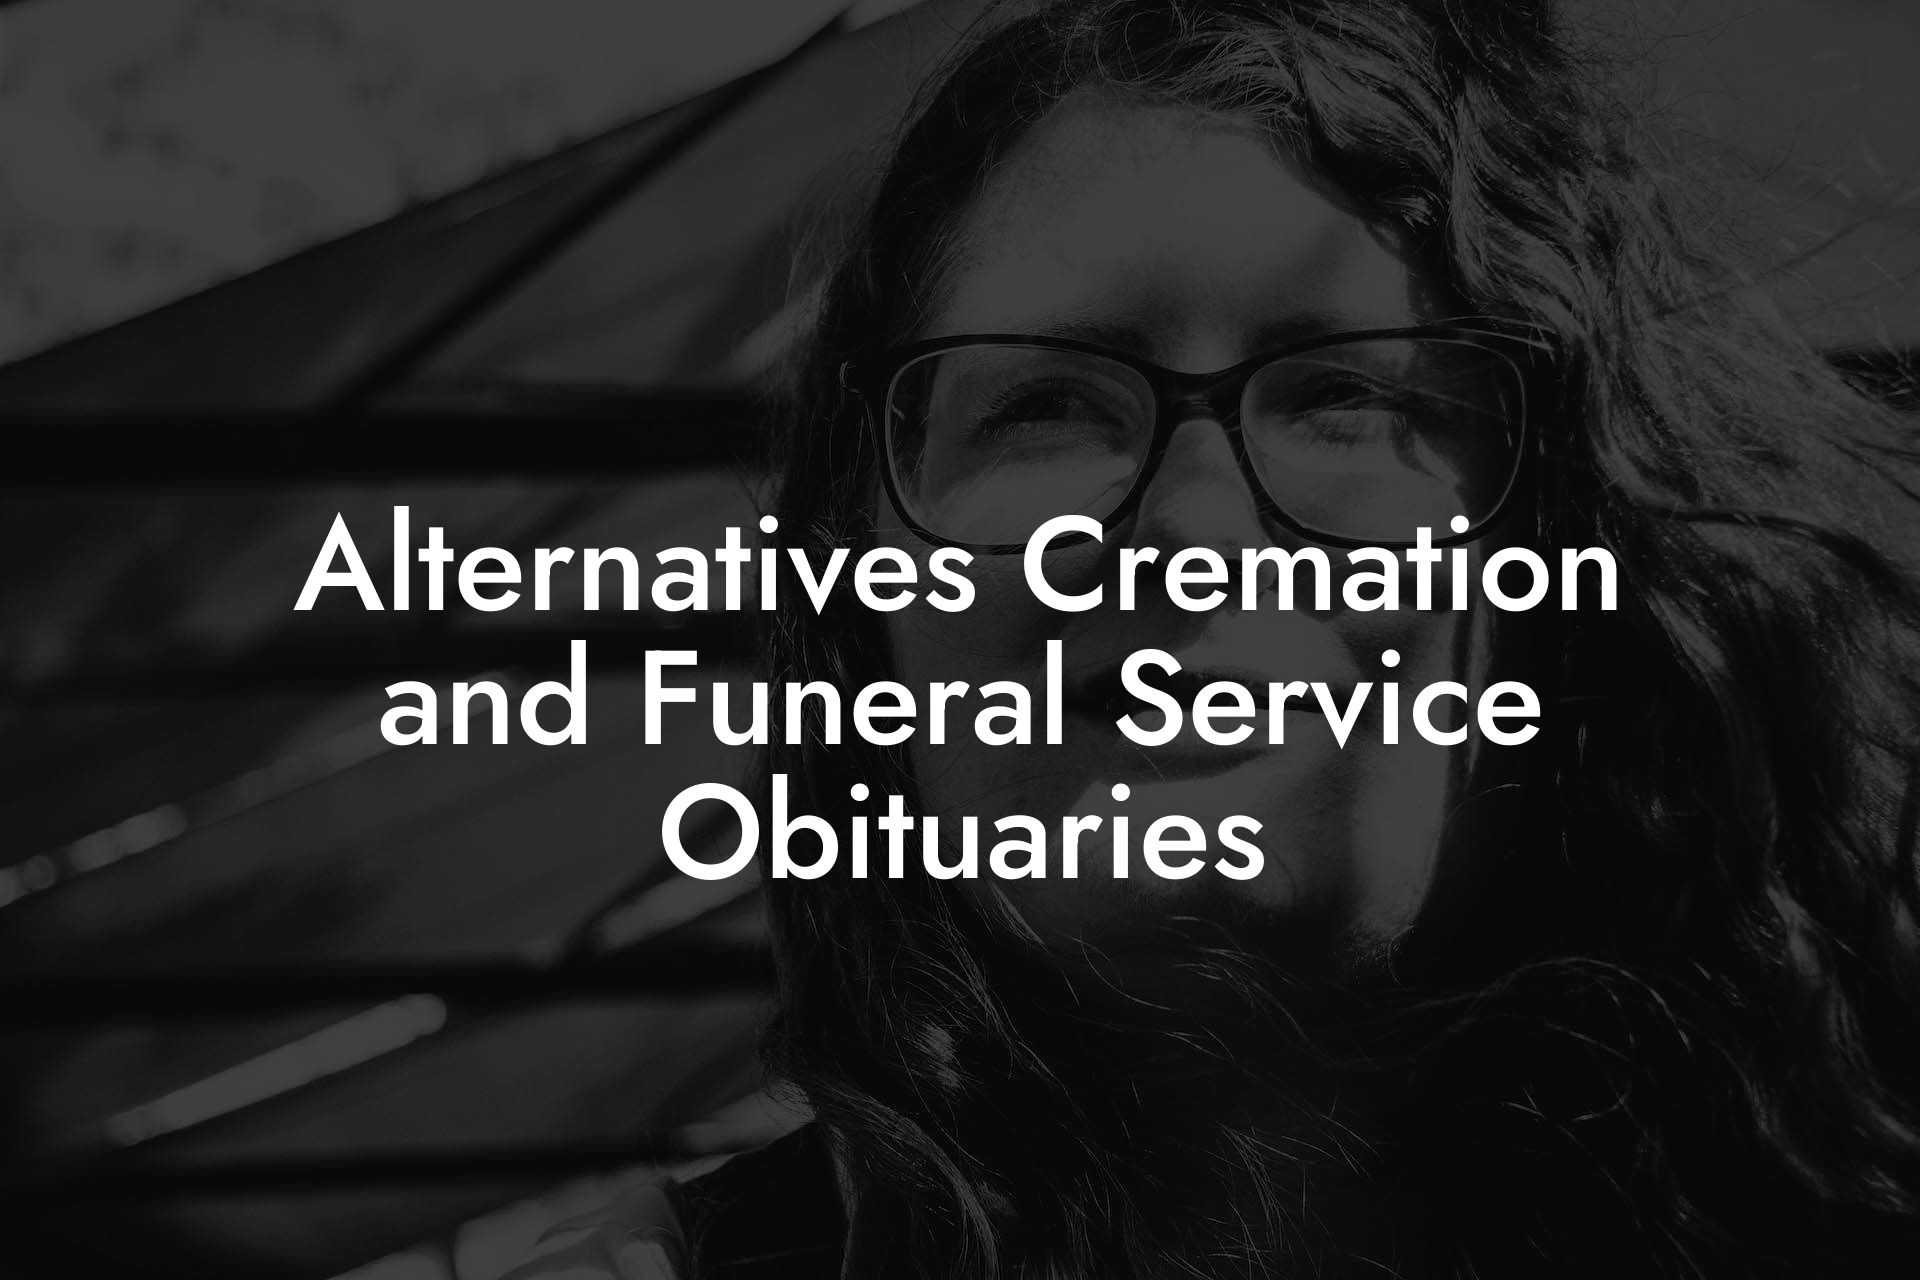 Alternatives Cremation and Funeral Service Obituaries